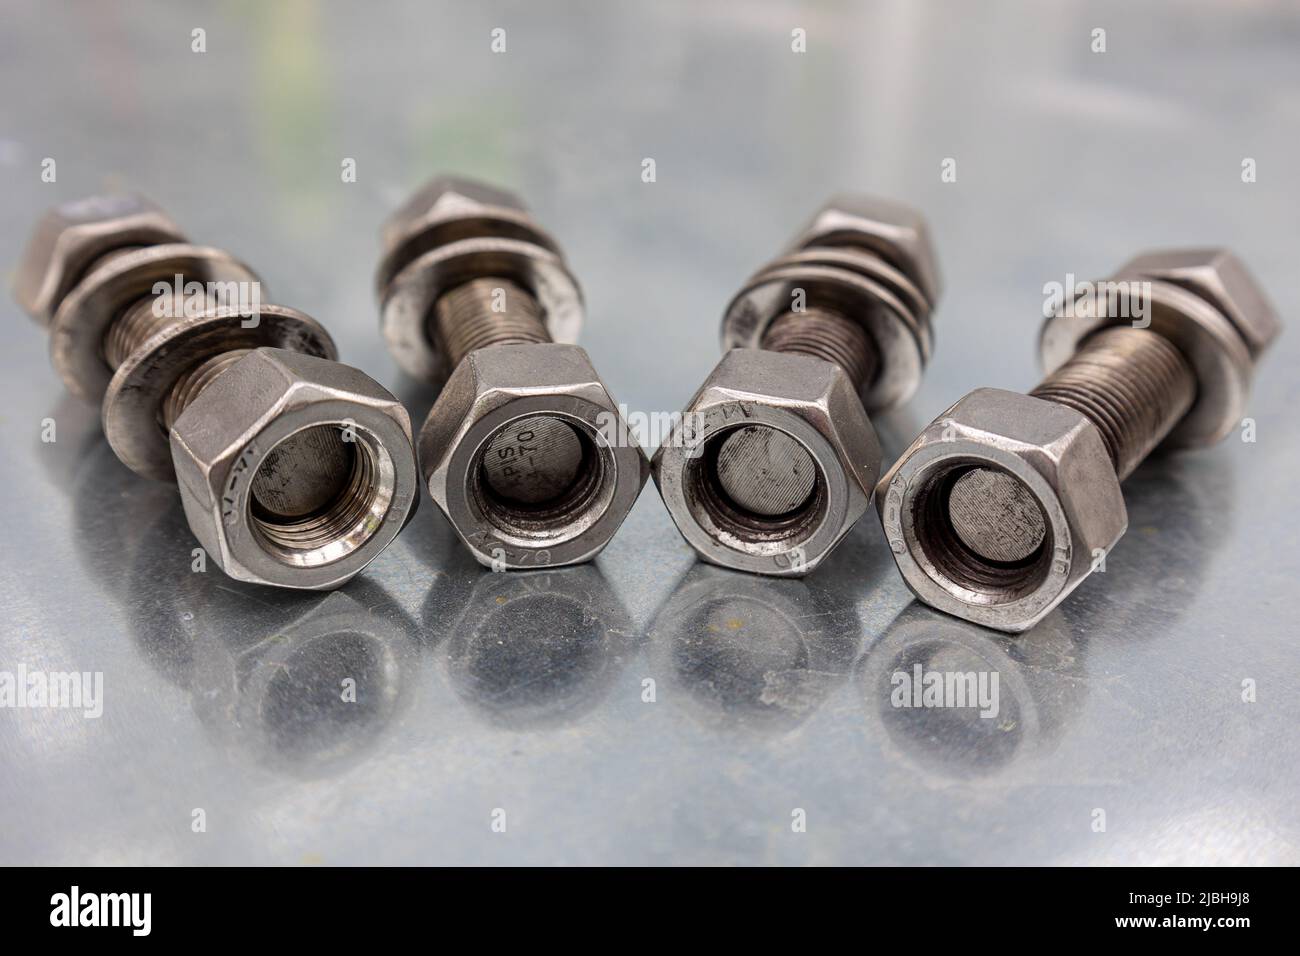 Large bolts and nuts on a galvanized sheet, ready for industrial mounting Stock Photo